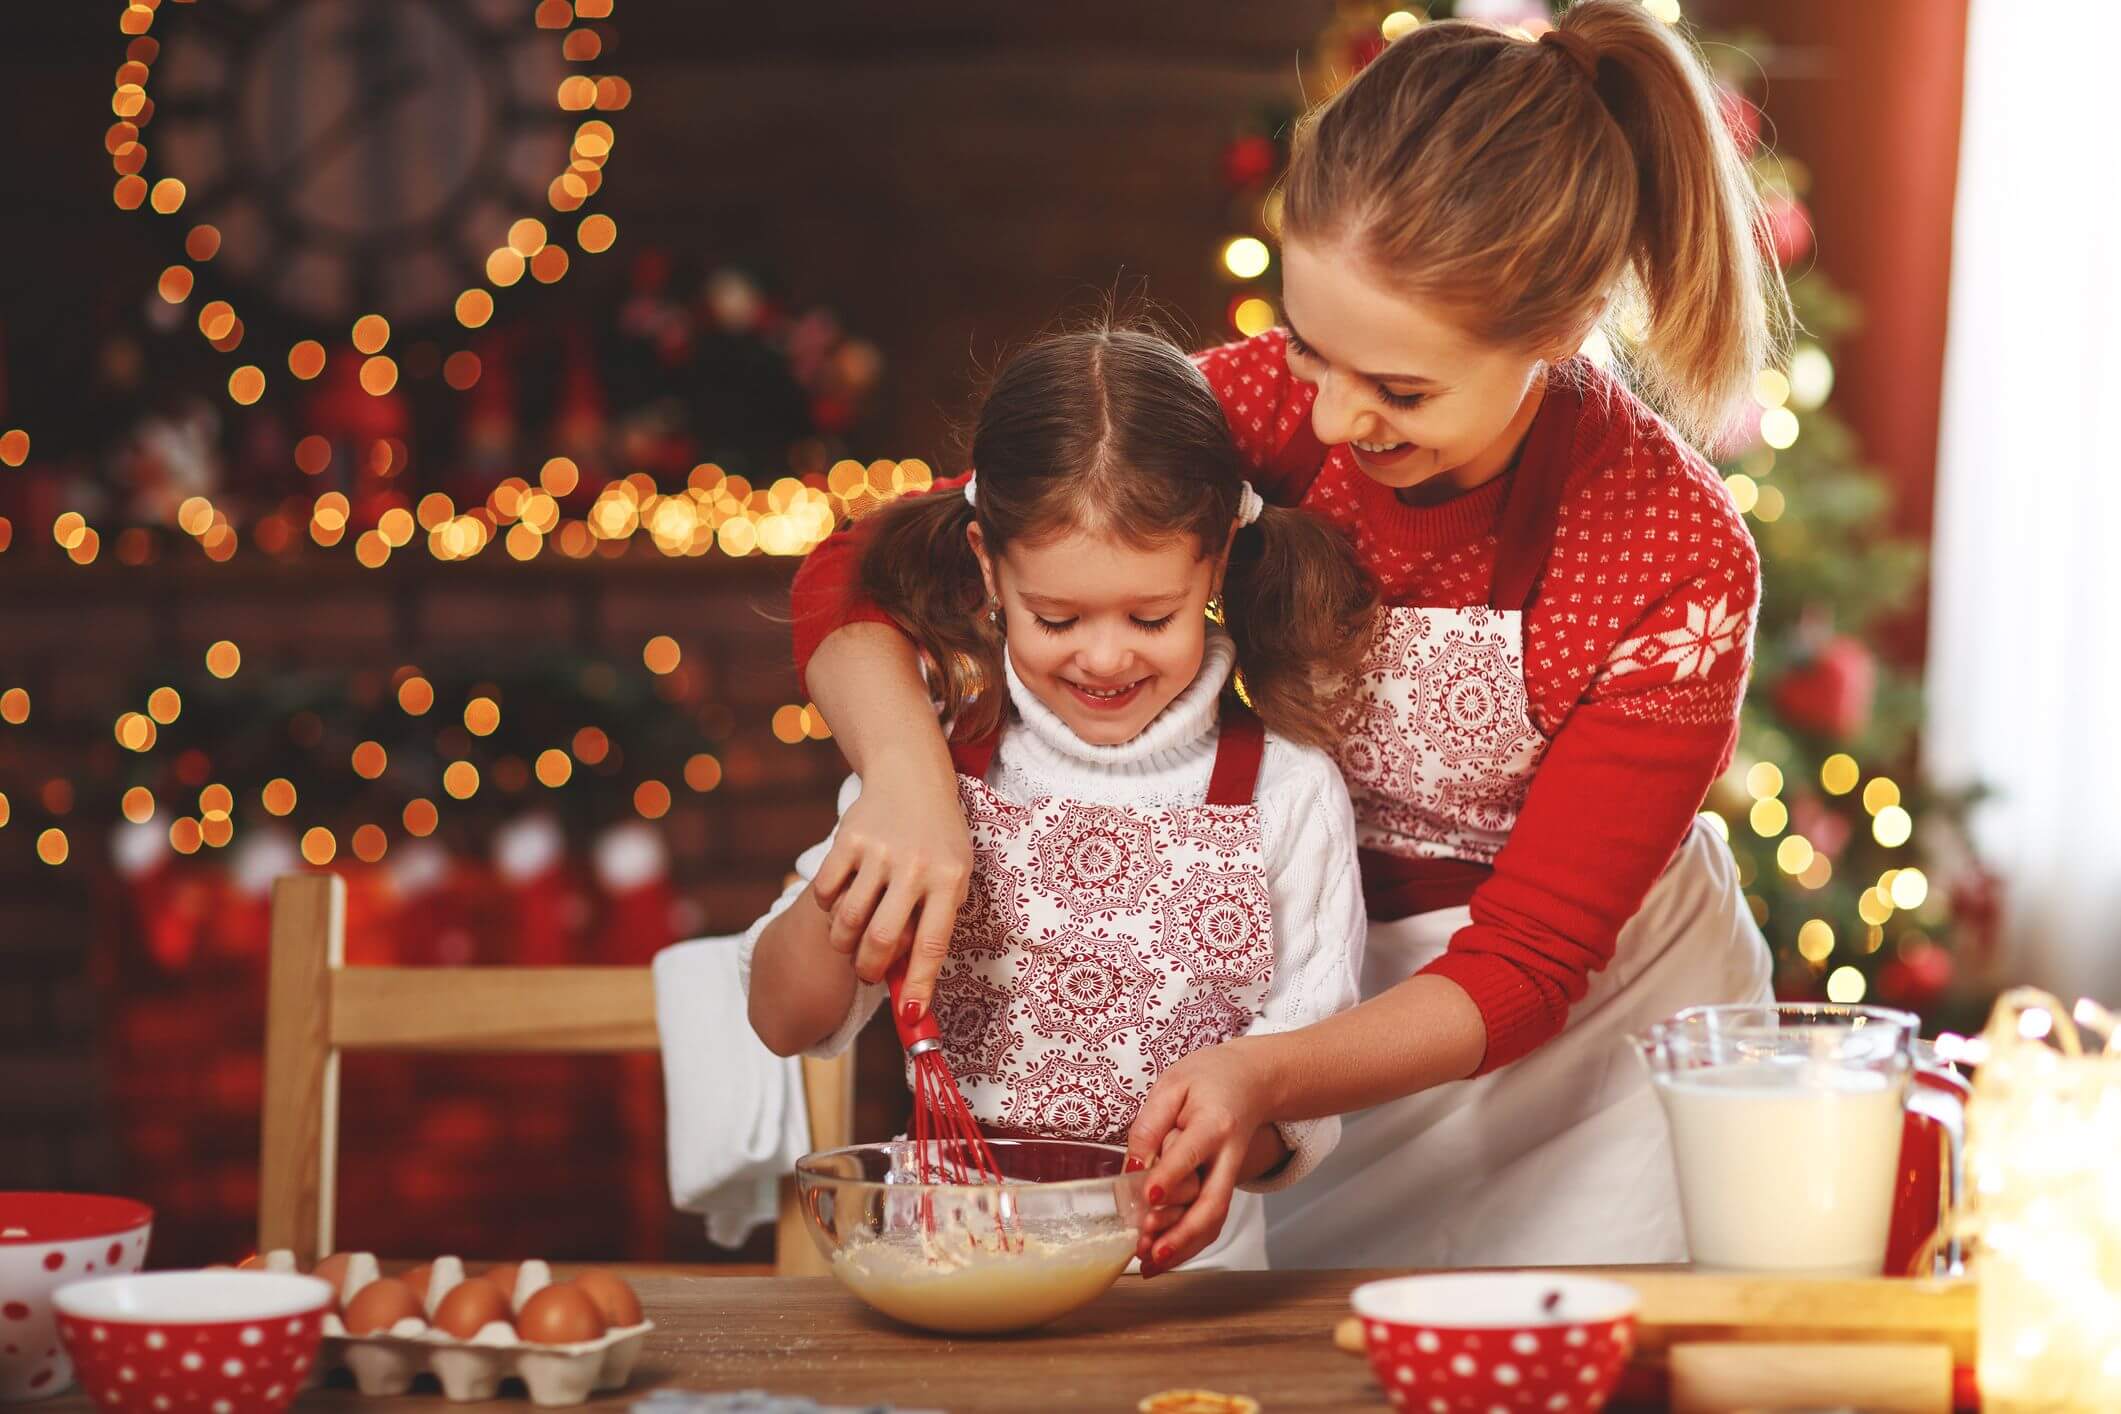 5 Holiday Meals That Are Healthy For Children's Teeth